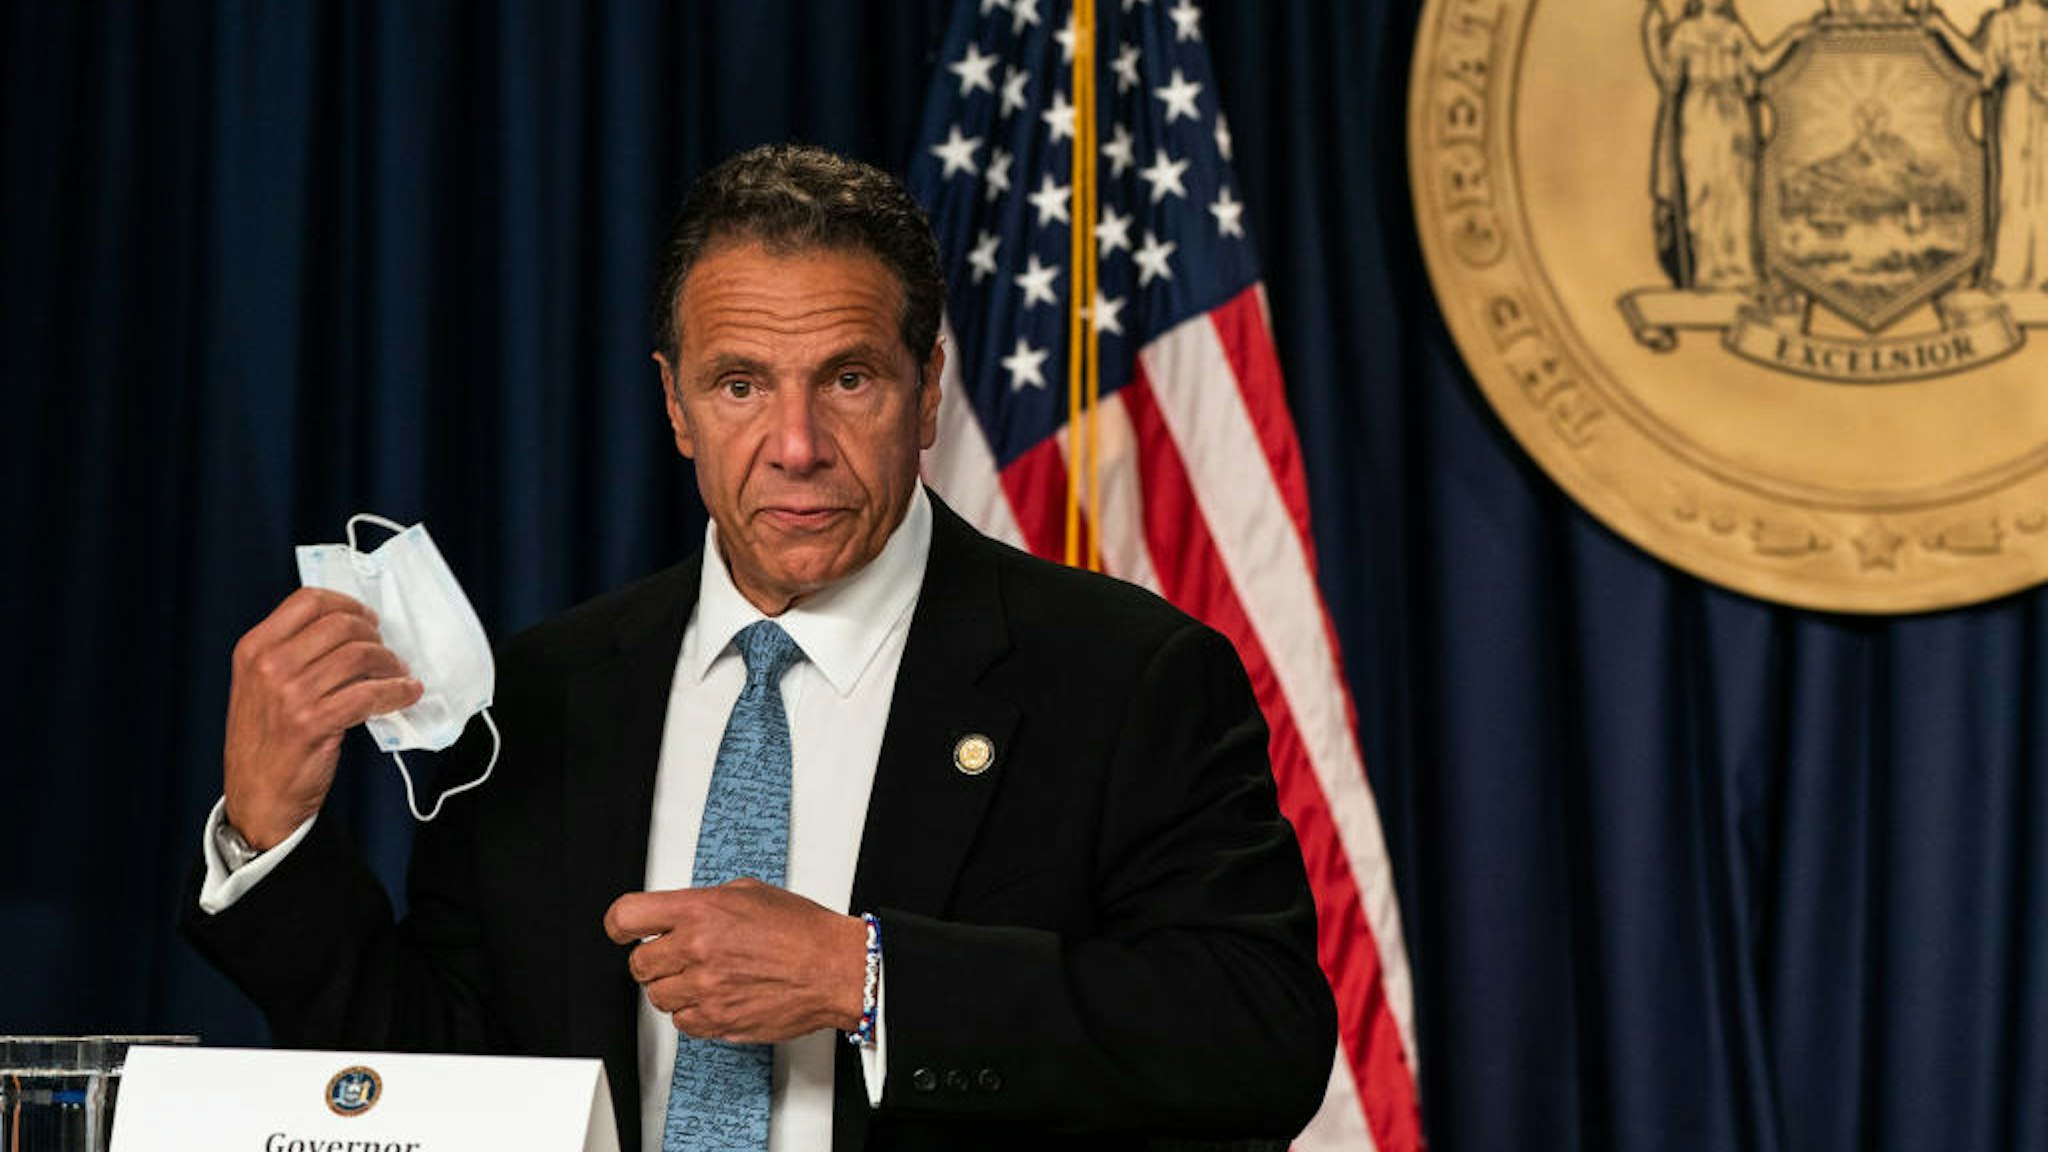 NEW YORK, NY - JULY 23: New York Gov. Andrew Cuomo takes off a protective mask during the daily media briefing at the Office of the Governor of the State of New York on July 23, 2020 in New York City. The Governor said the state liquor authority has suspended 27 bar and restaurant alcohol licenses for violations of social distancing rules as public officials try to keep the coronavirus outbreak under control. (Photo by Jeenah Moon/Getty Images)